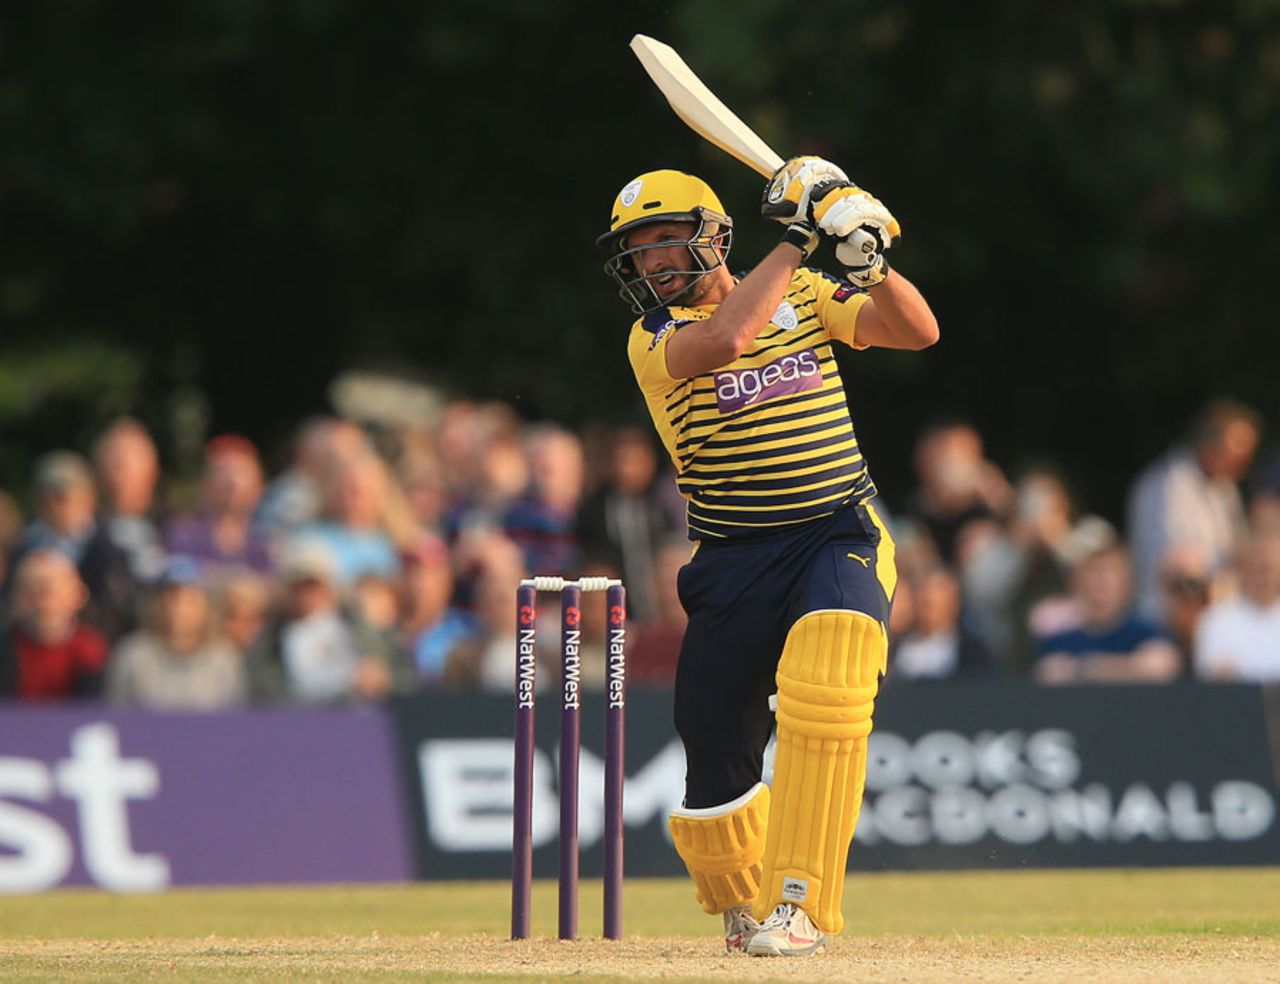 Shahid Afridi scored 8 off six balls after taking 2 for 27, Middlesex v Hampshire, NatWest T20 Blast, South Group, Uxbridge, May 27, 2016